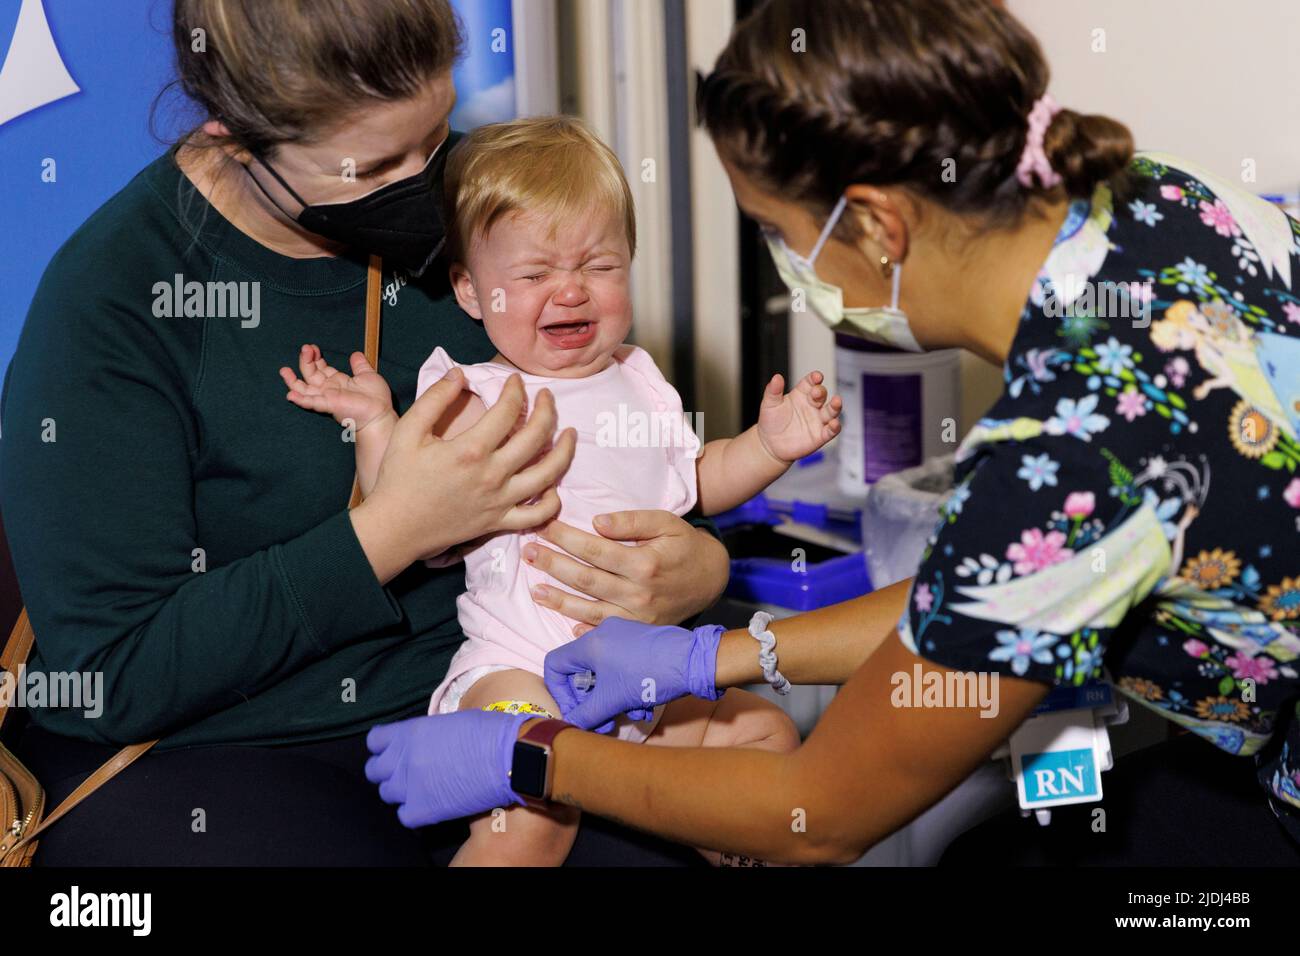 Following CDC approval for vaccination of children aged 6 months to 5 years, 10 month old Hazel Ribnik reacts, as nurse Jillian Mercer administers the Moderna vaccine for the coronavirus disease (COVID-19) at Rady Children’s Hospital in San Diego, California, U.S., June 21, 2022.  REUTERS/Mike Blake Stock Photo